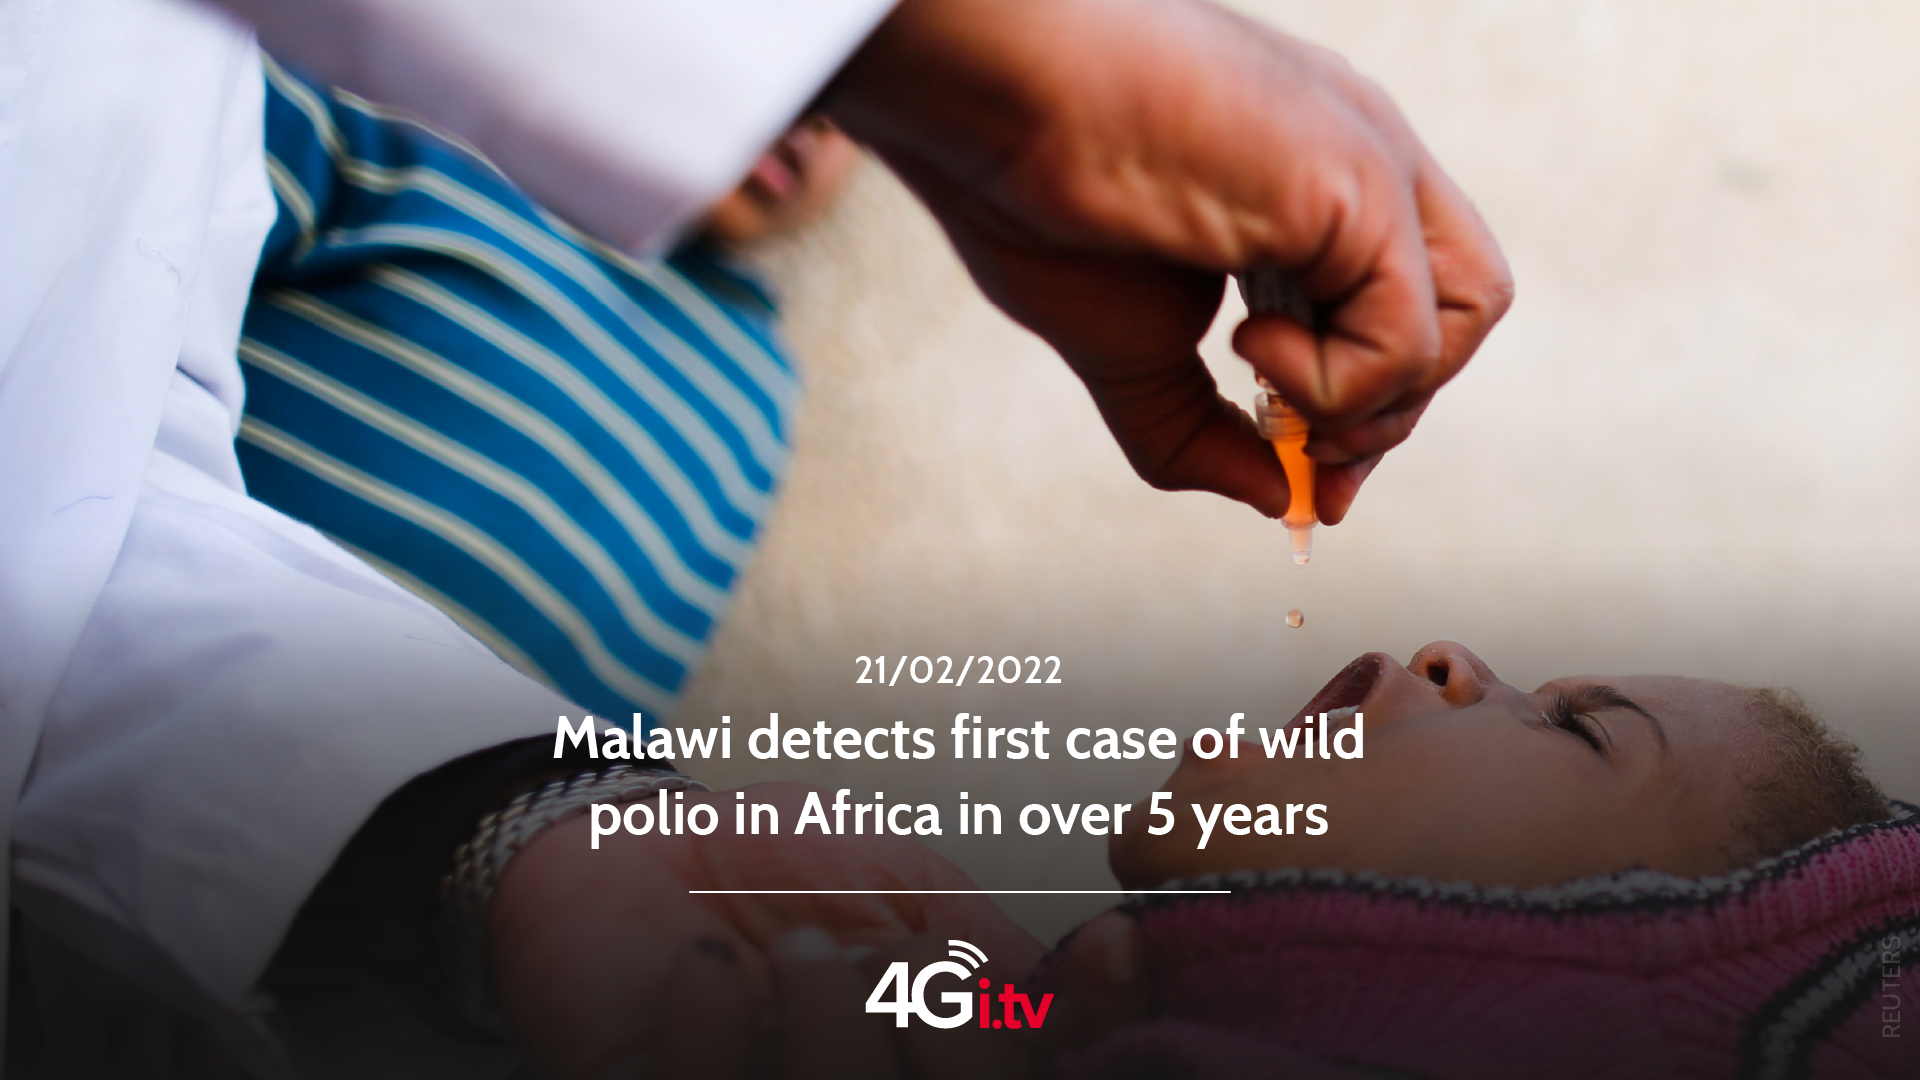 Подробнее о статье Malawi detects first case of wild polio in Africa in over 5 years